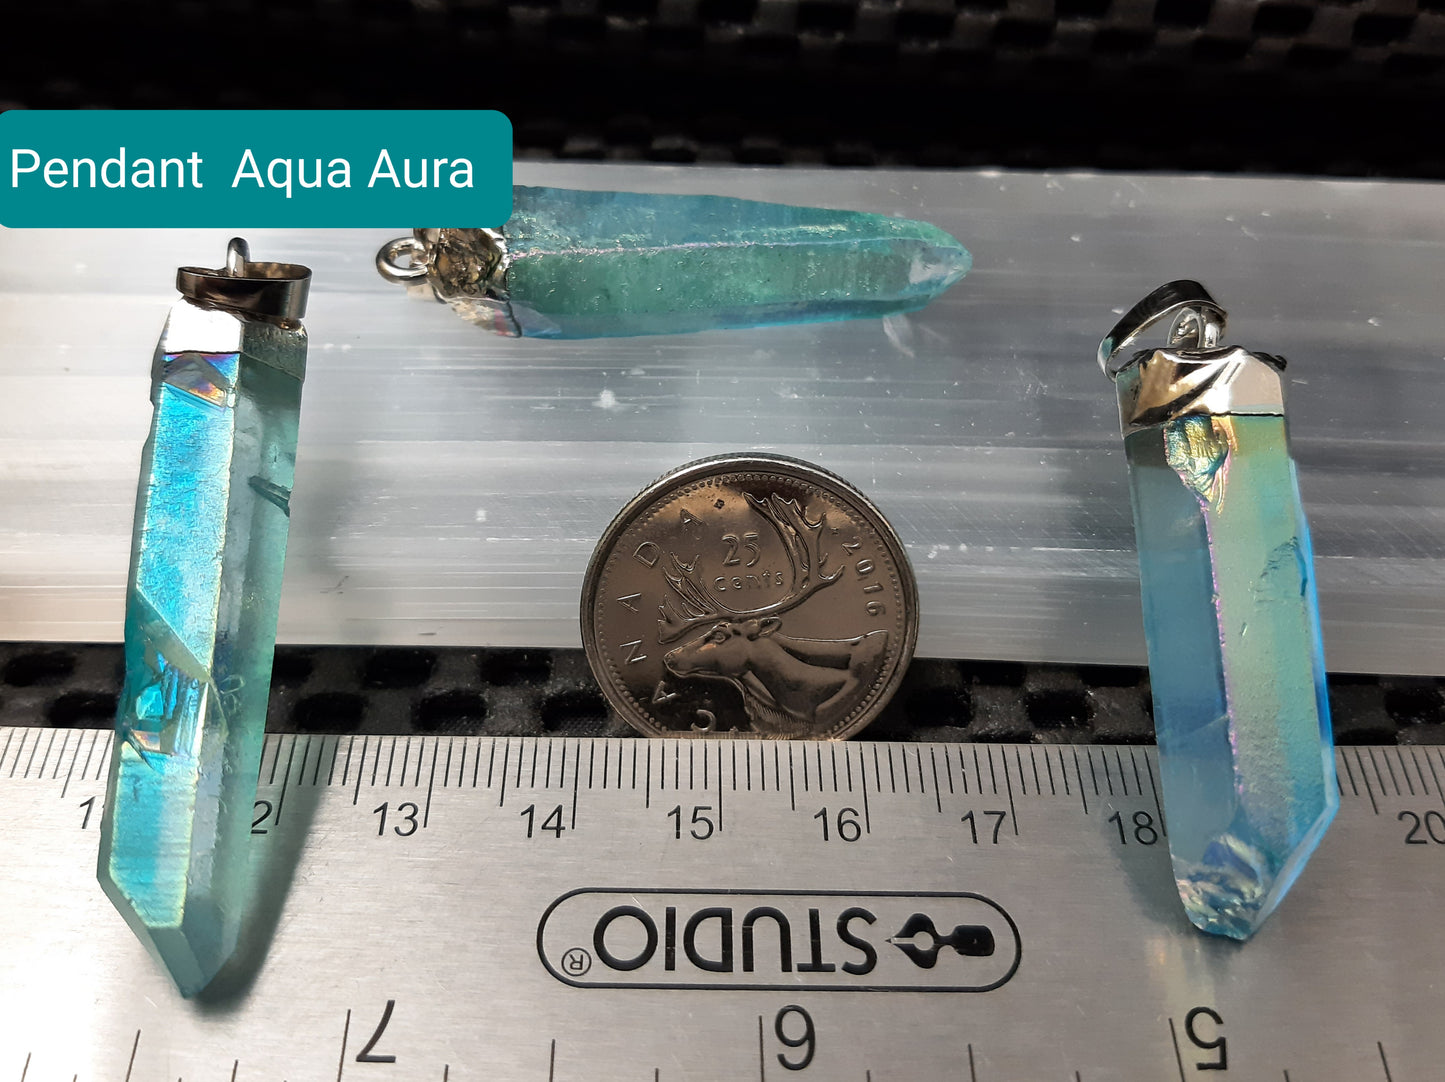 Aqua Aura Plated Crystal Point in Turquoise AB Pendant RETAIL on Cardstock